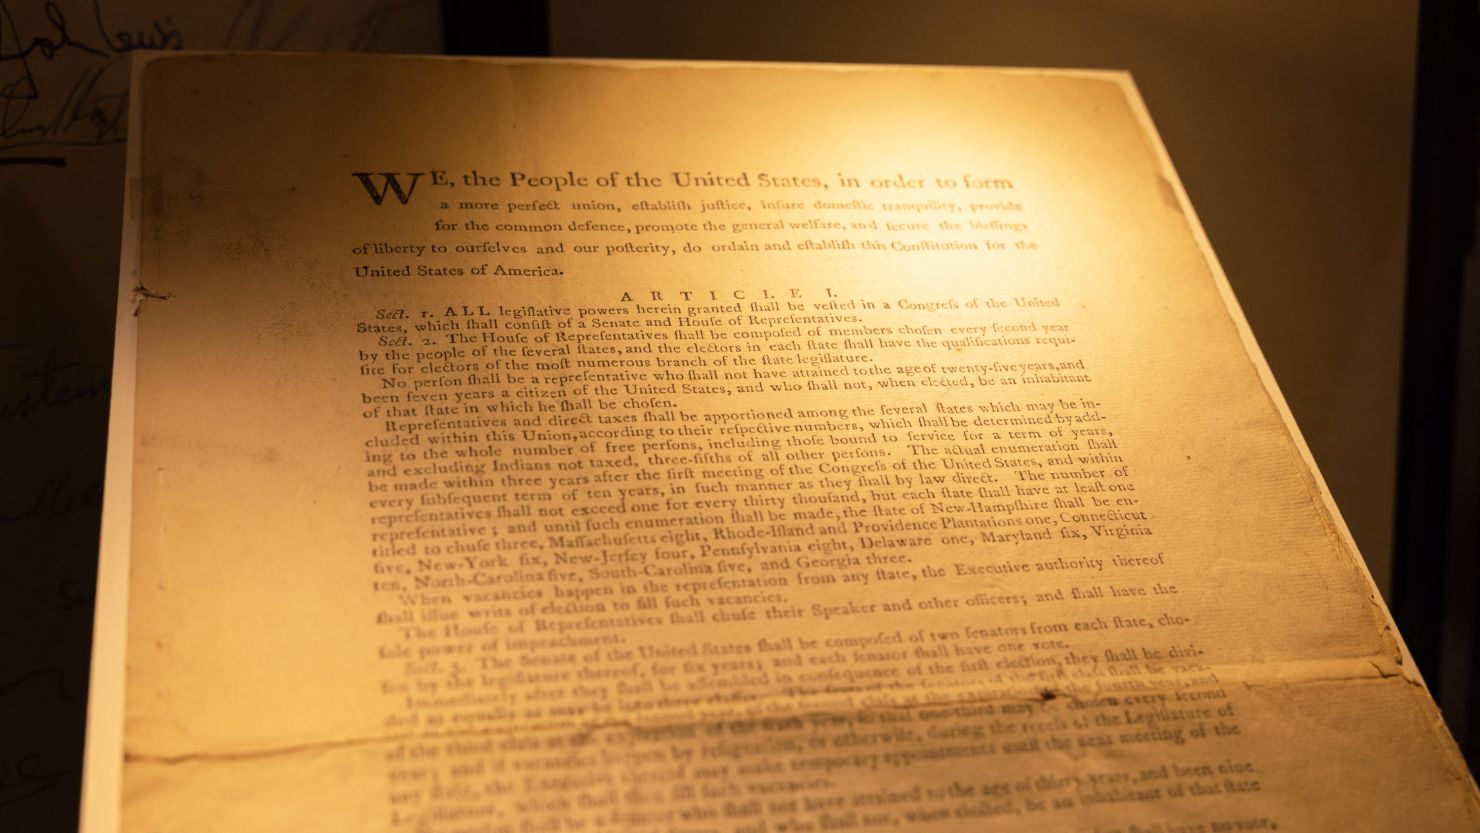 The first printing of the United States Constitution is displayed during an auction at Sotheby's auction house in New York on November 18, 2021.